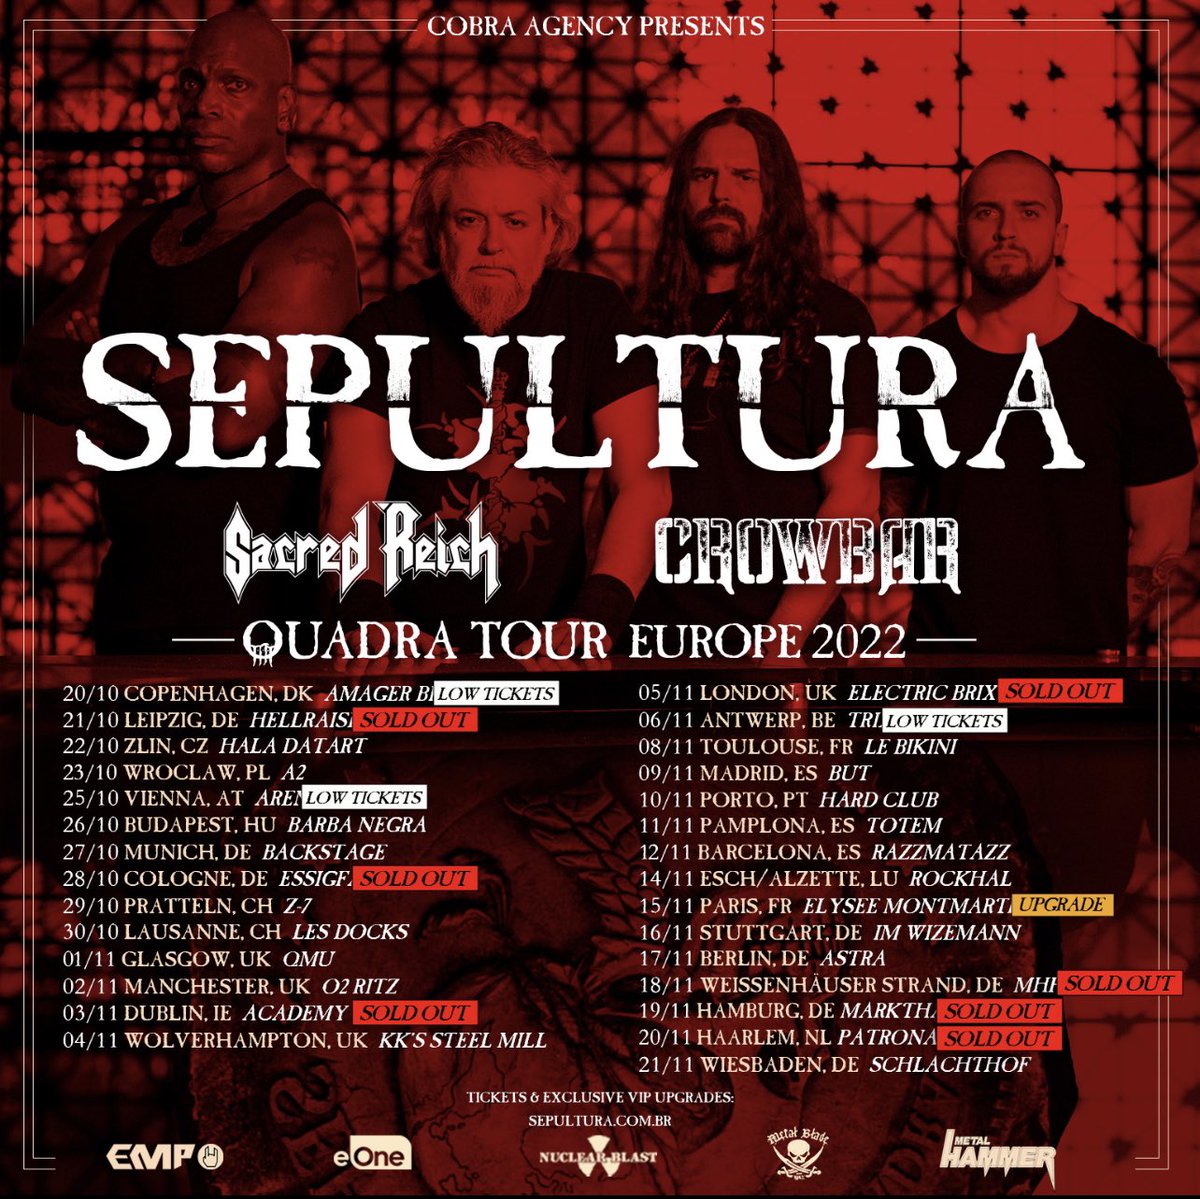 London is SOLD OUT. Paris has been upgraded to Elysee Montmatre. Low tickets in Copenhagen, Vienna and Antwerp. Our tour with @sepulturacombr and @crowbarrules is going to be killer. Don’t miss out!